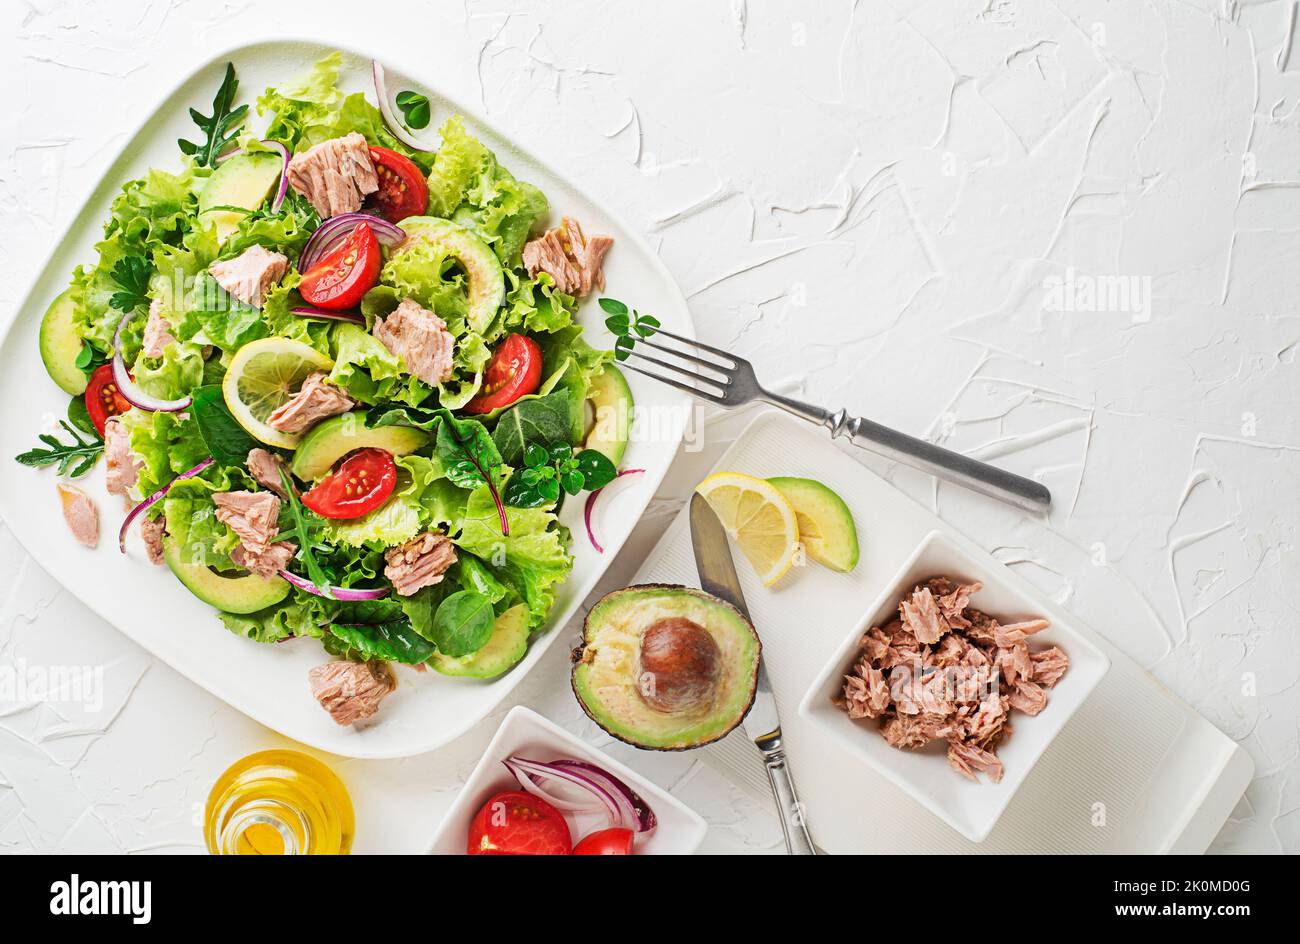 Fresh green leafy salad with tuna avocado and tomato on white table background. Concept for a tasty and healthy meal Stock Photo